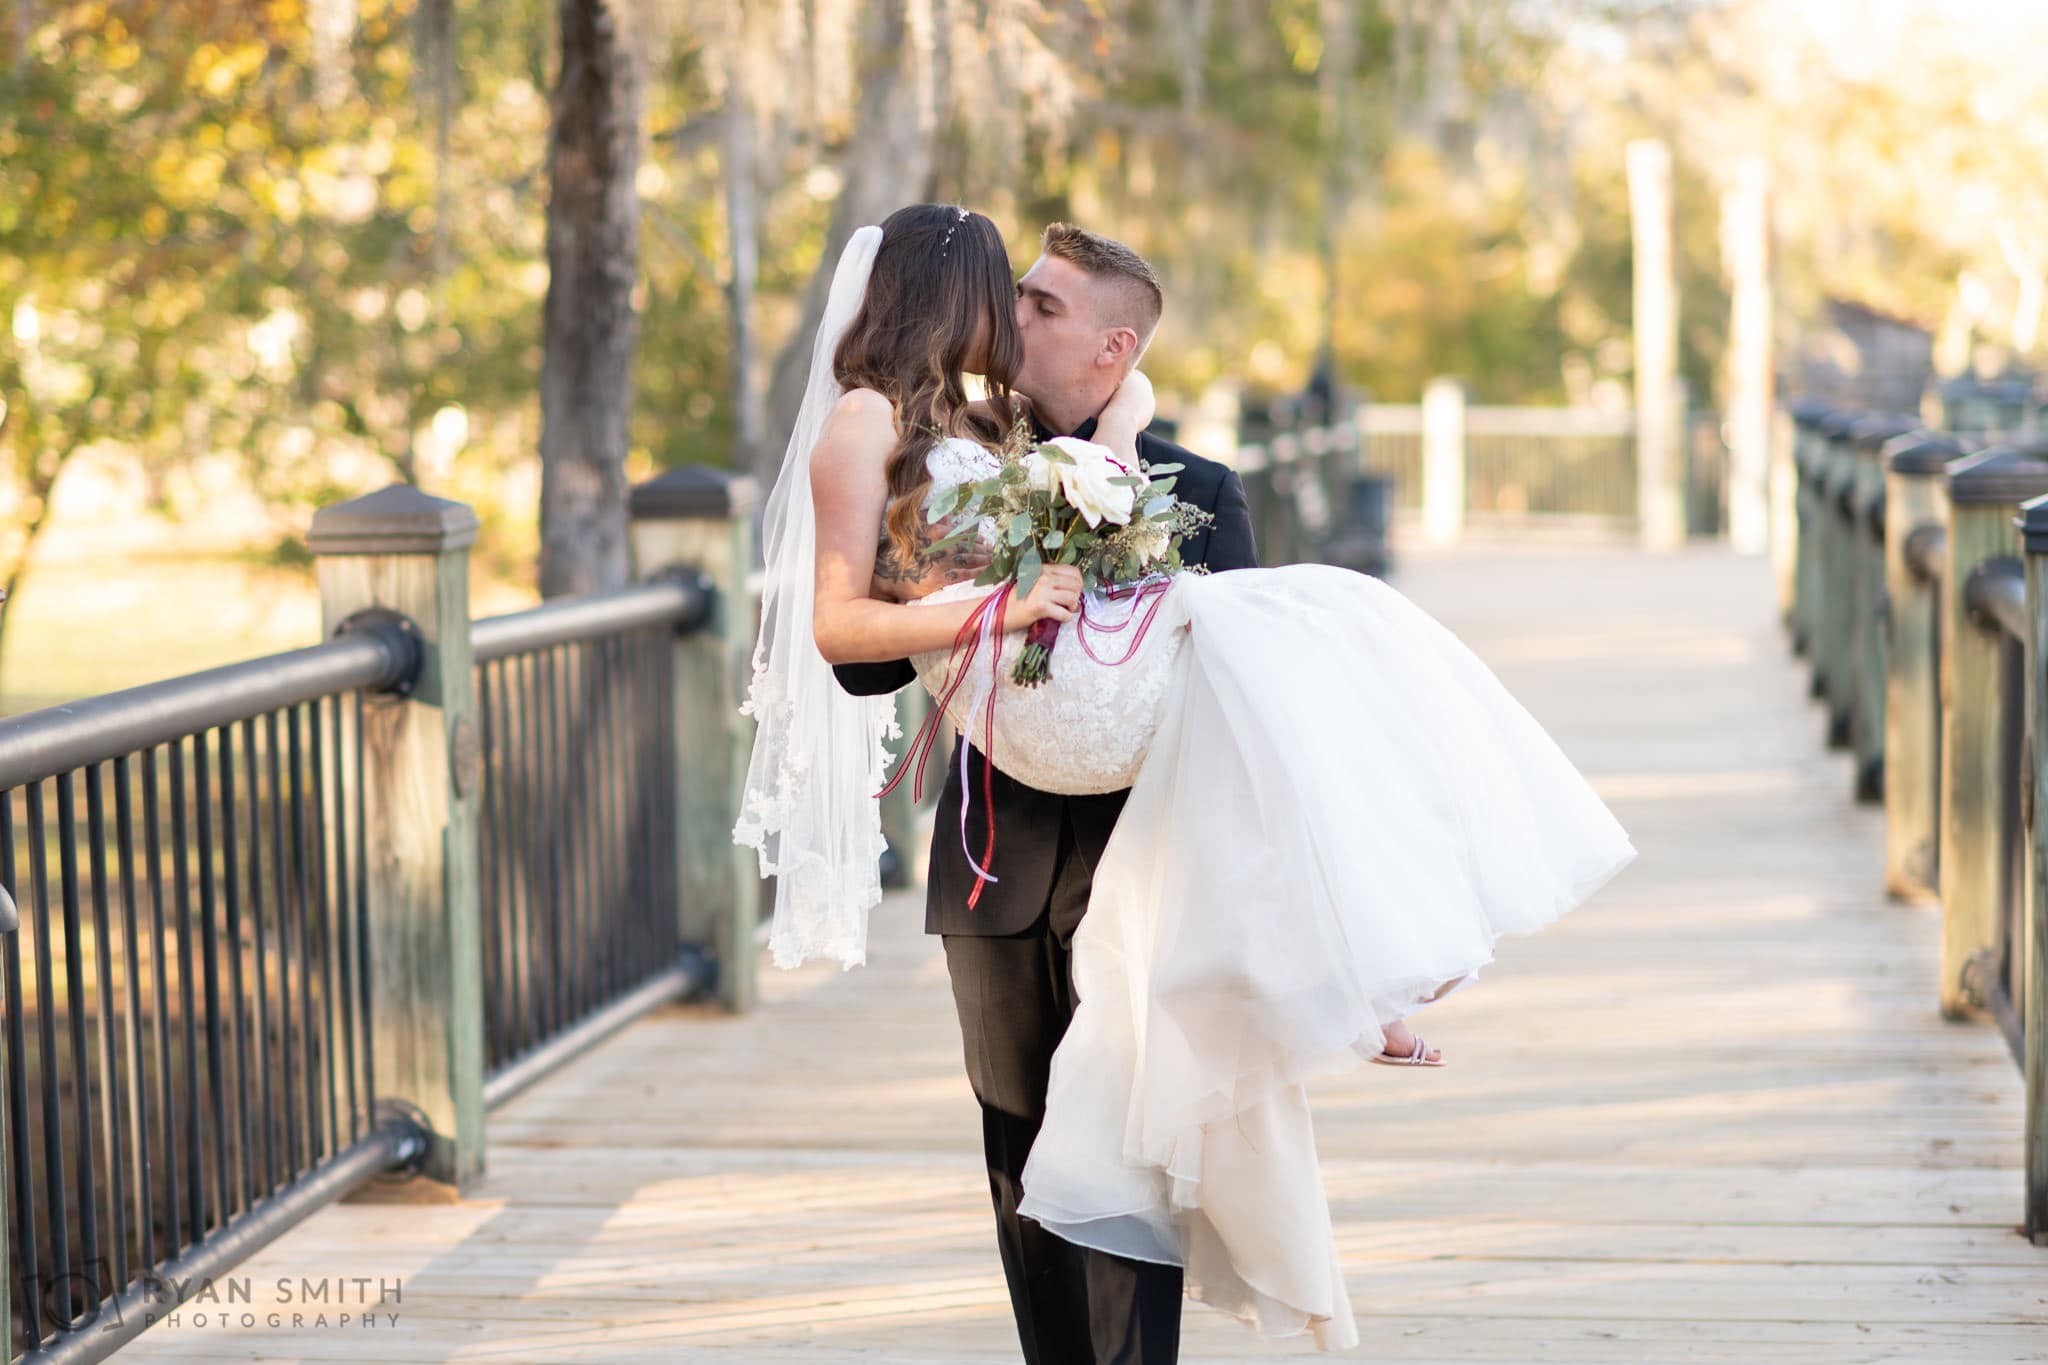 Groom carrying bride down the boardwalk - Conway River Walk